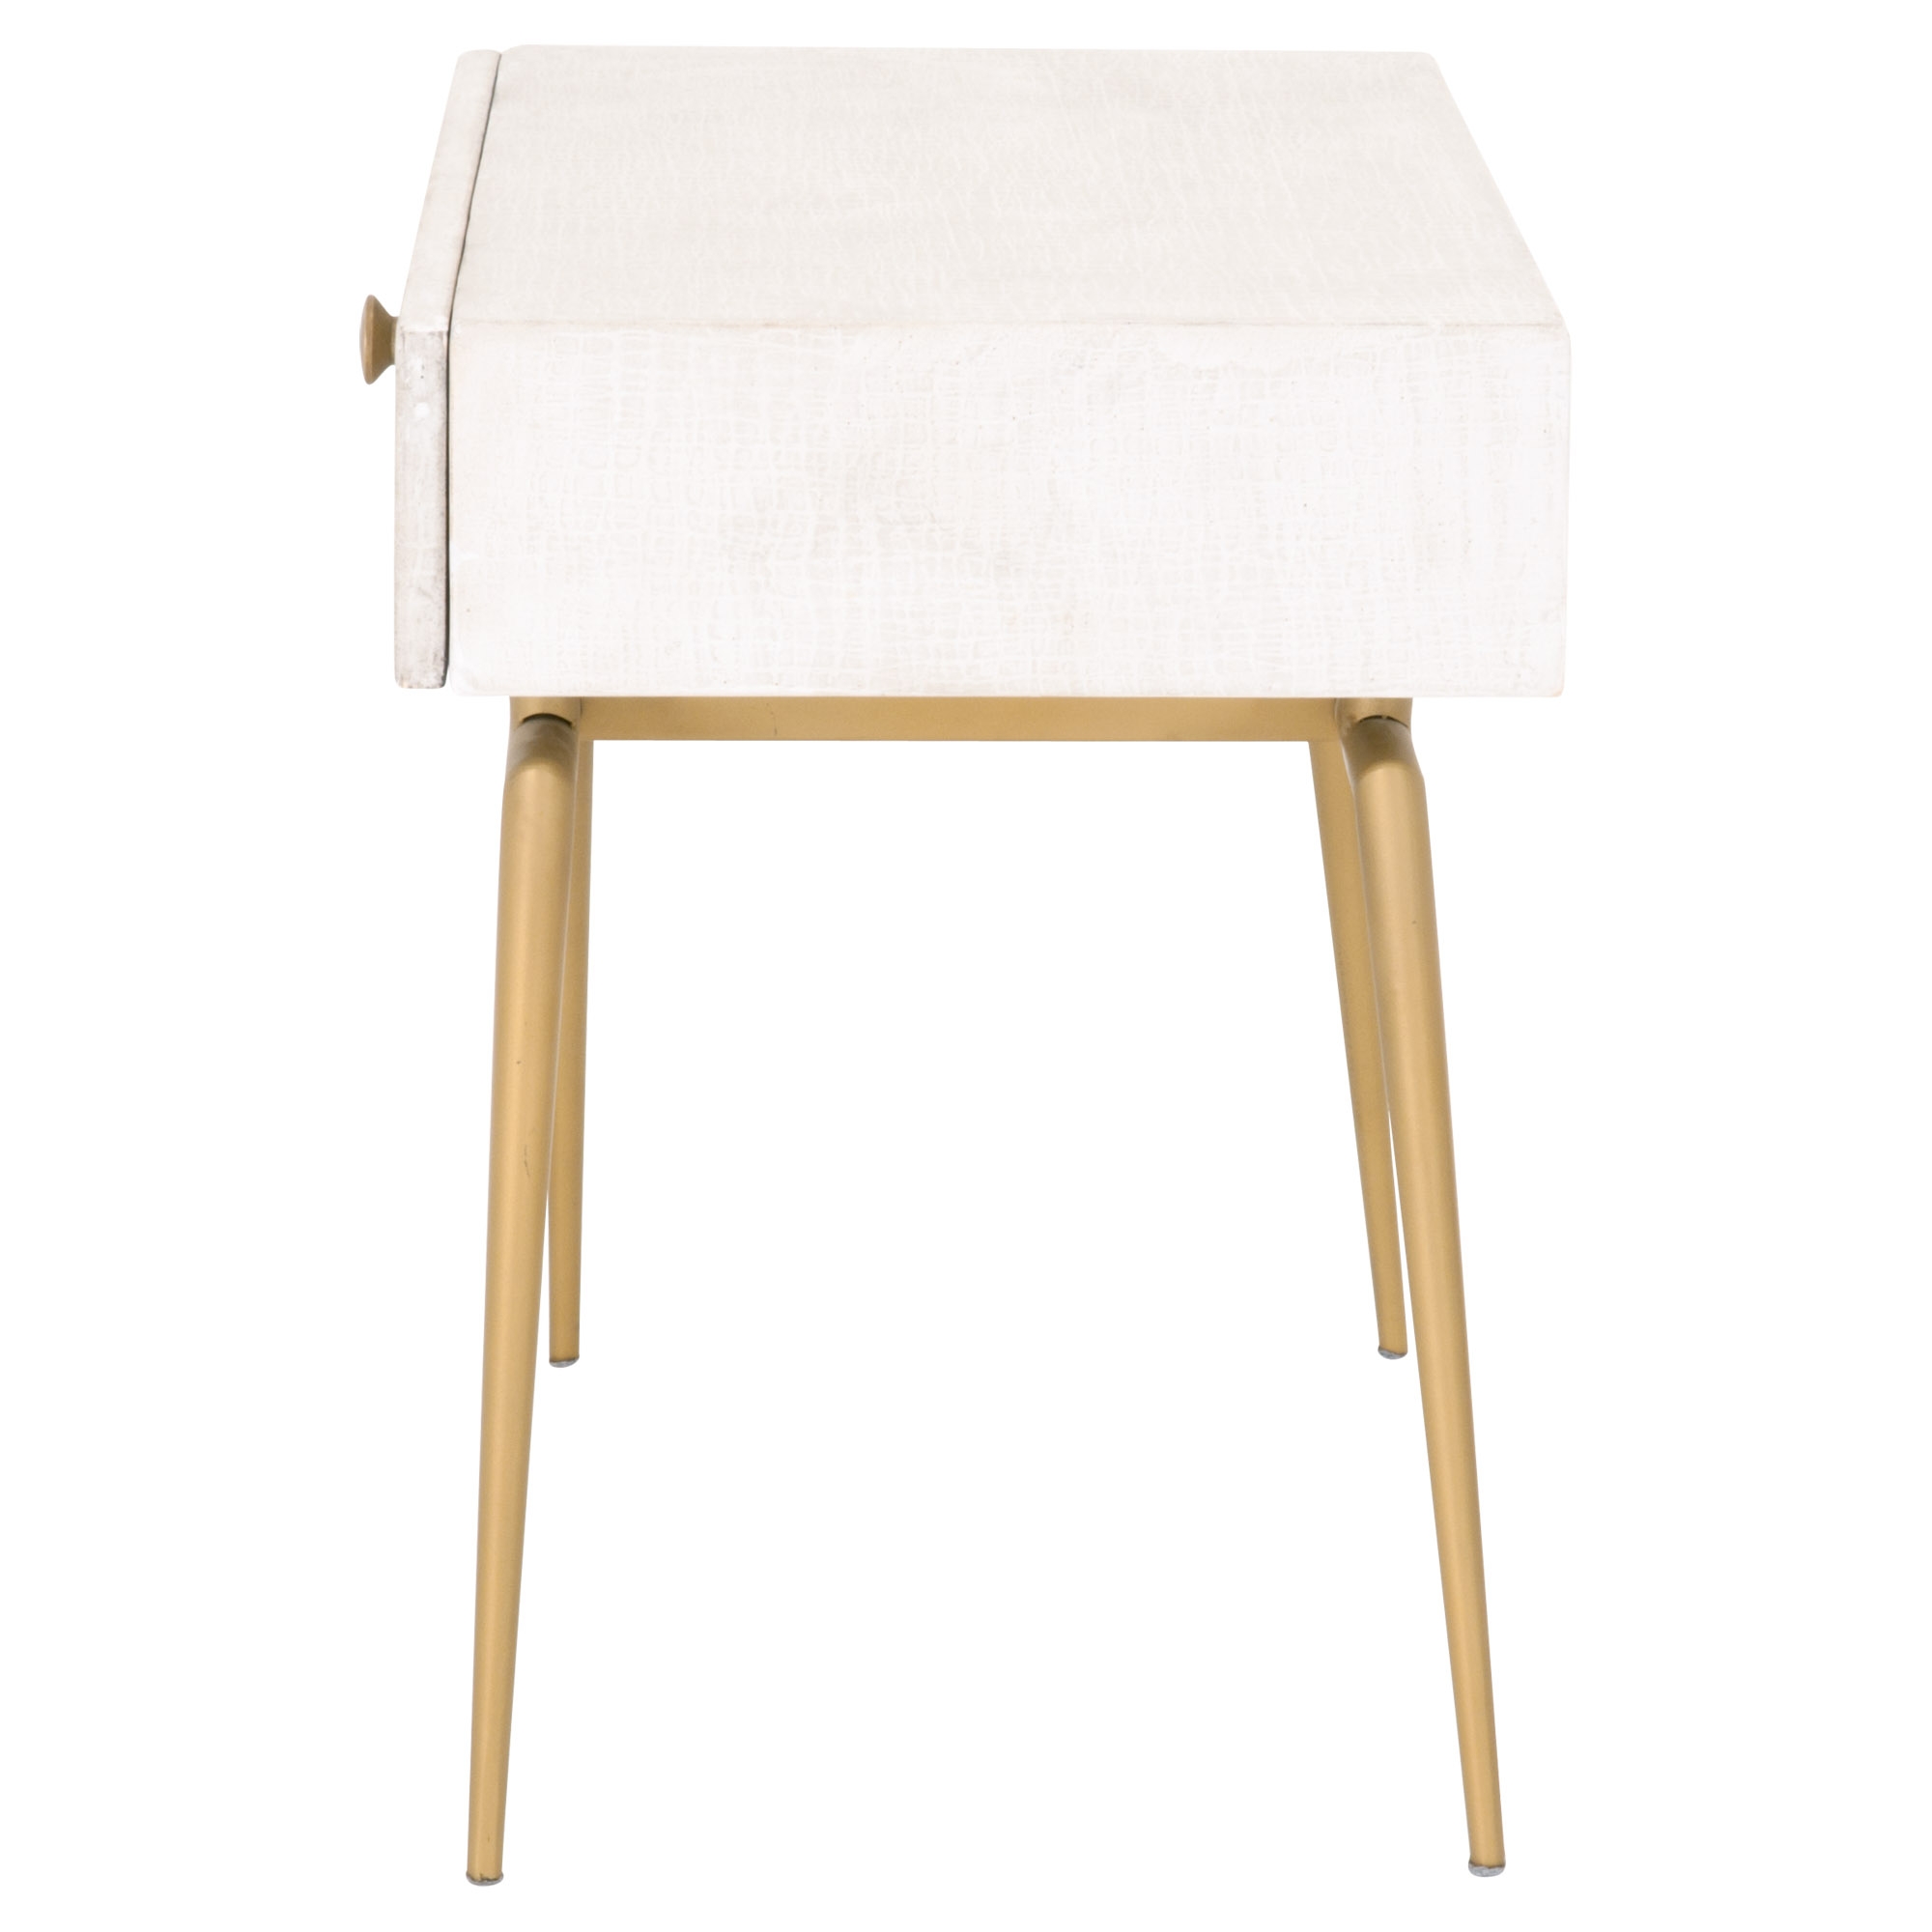 Melrose Accent Table - Image 4